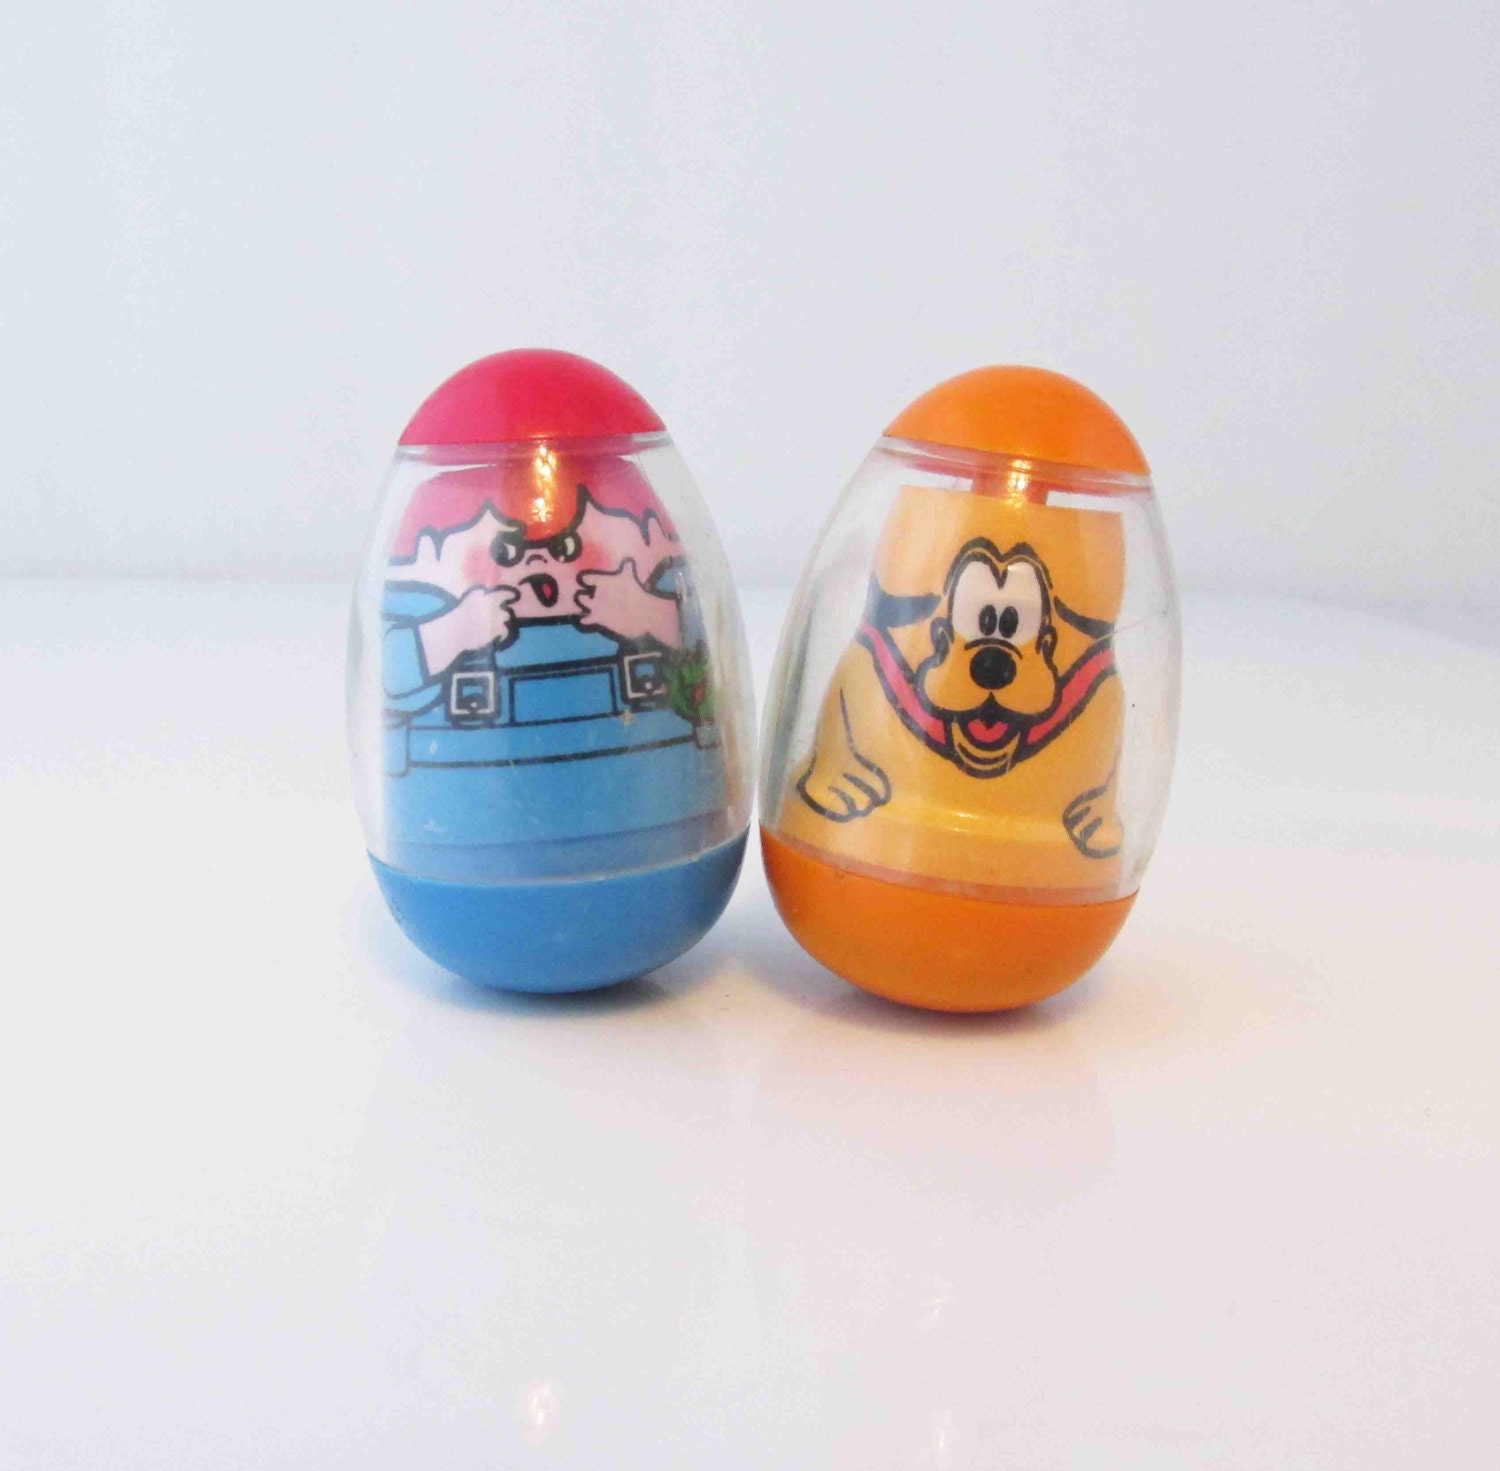 Weeble Wobble Toys 76